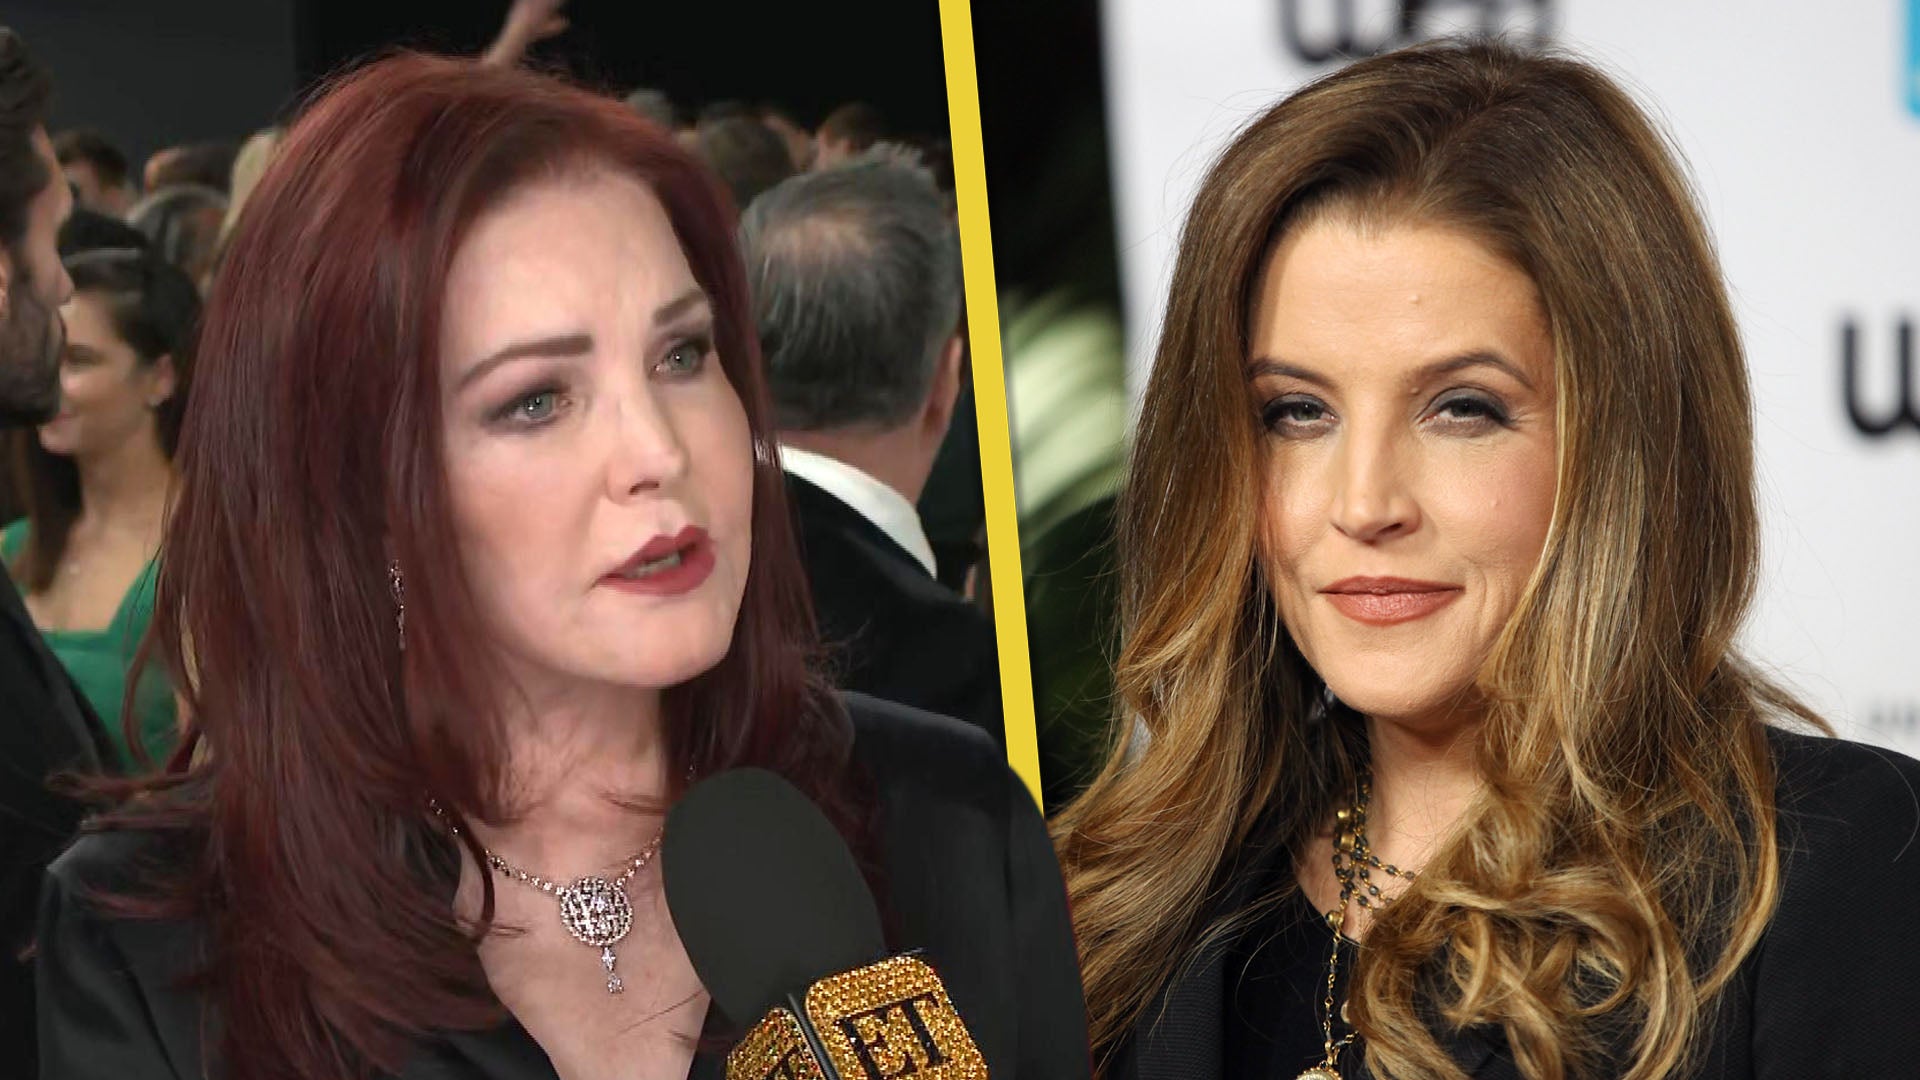 Priscilla Presley Gets Emotional Remembering Lisa Marie 1 Year After Her Death (Exclusive)